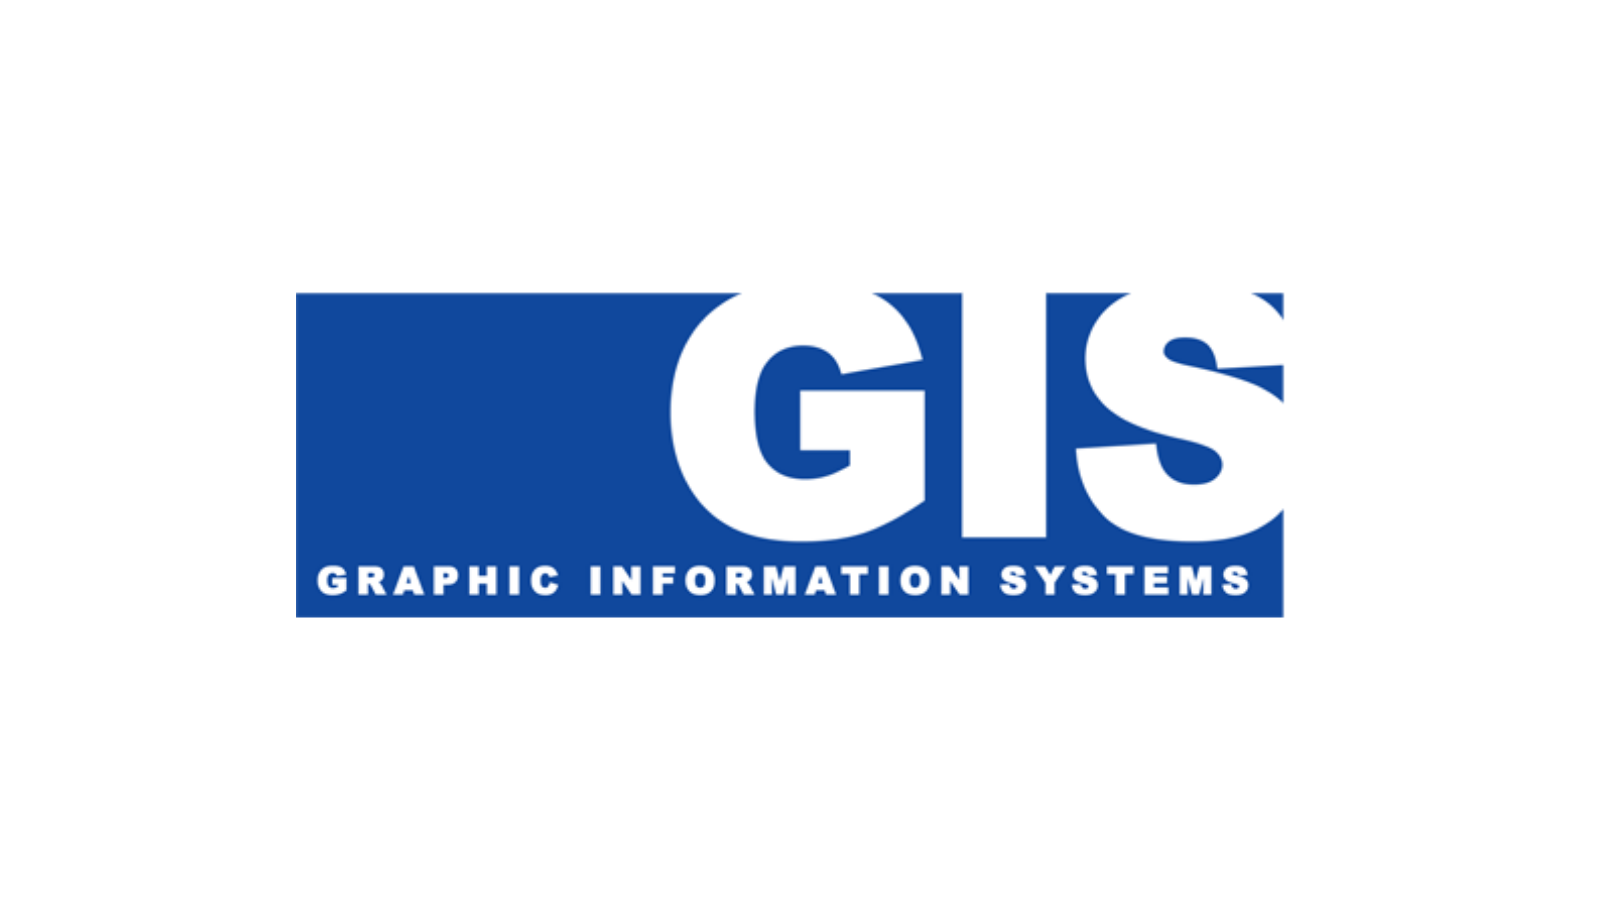 Graphic Information Systems